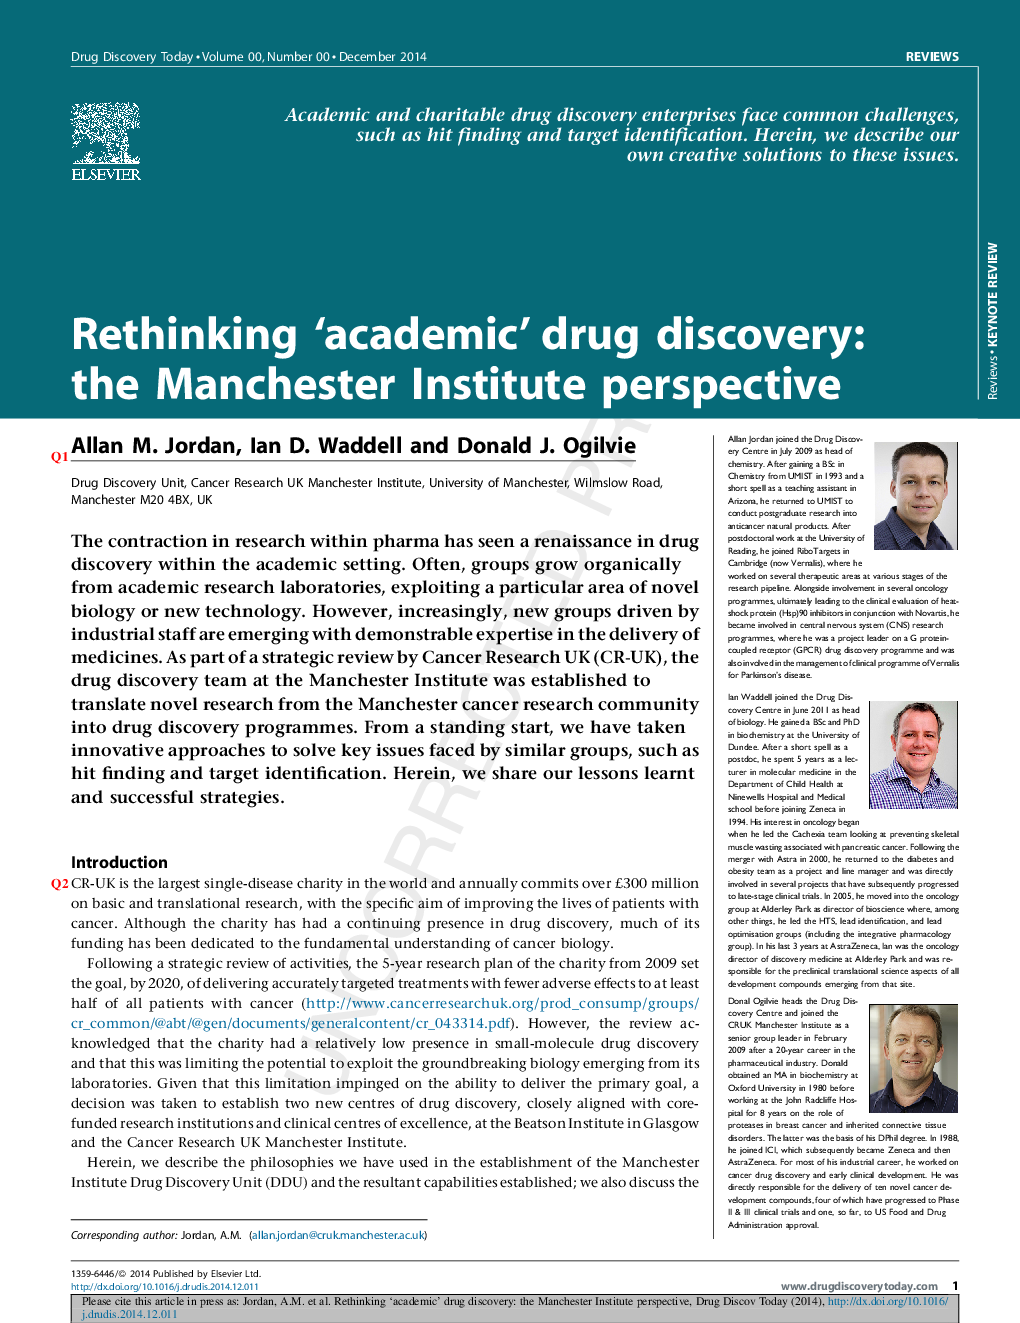 Rethinking 'academic' drug discovery: the Manchester Institute perspective